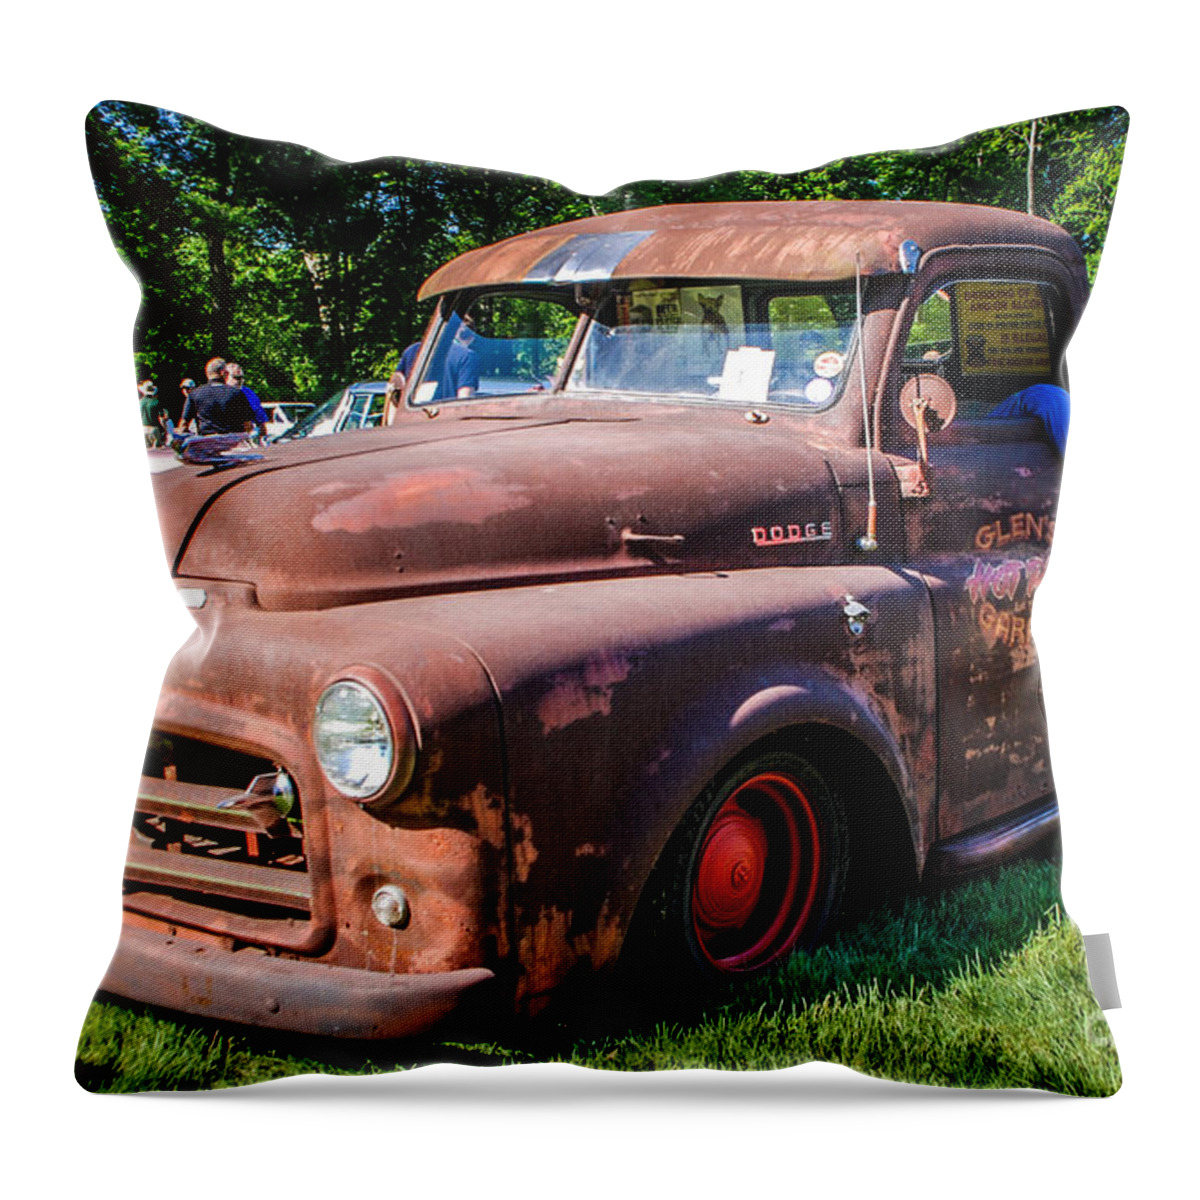 1952 Throw Pillow featuring the photograph 1952 Dodge Pickup by Grace Grogan